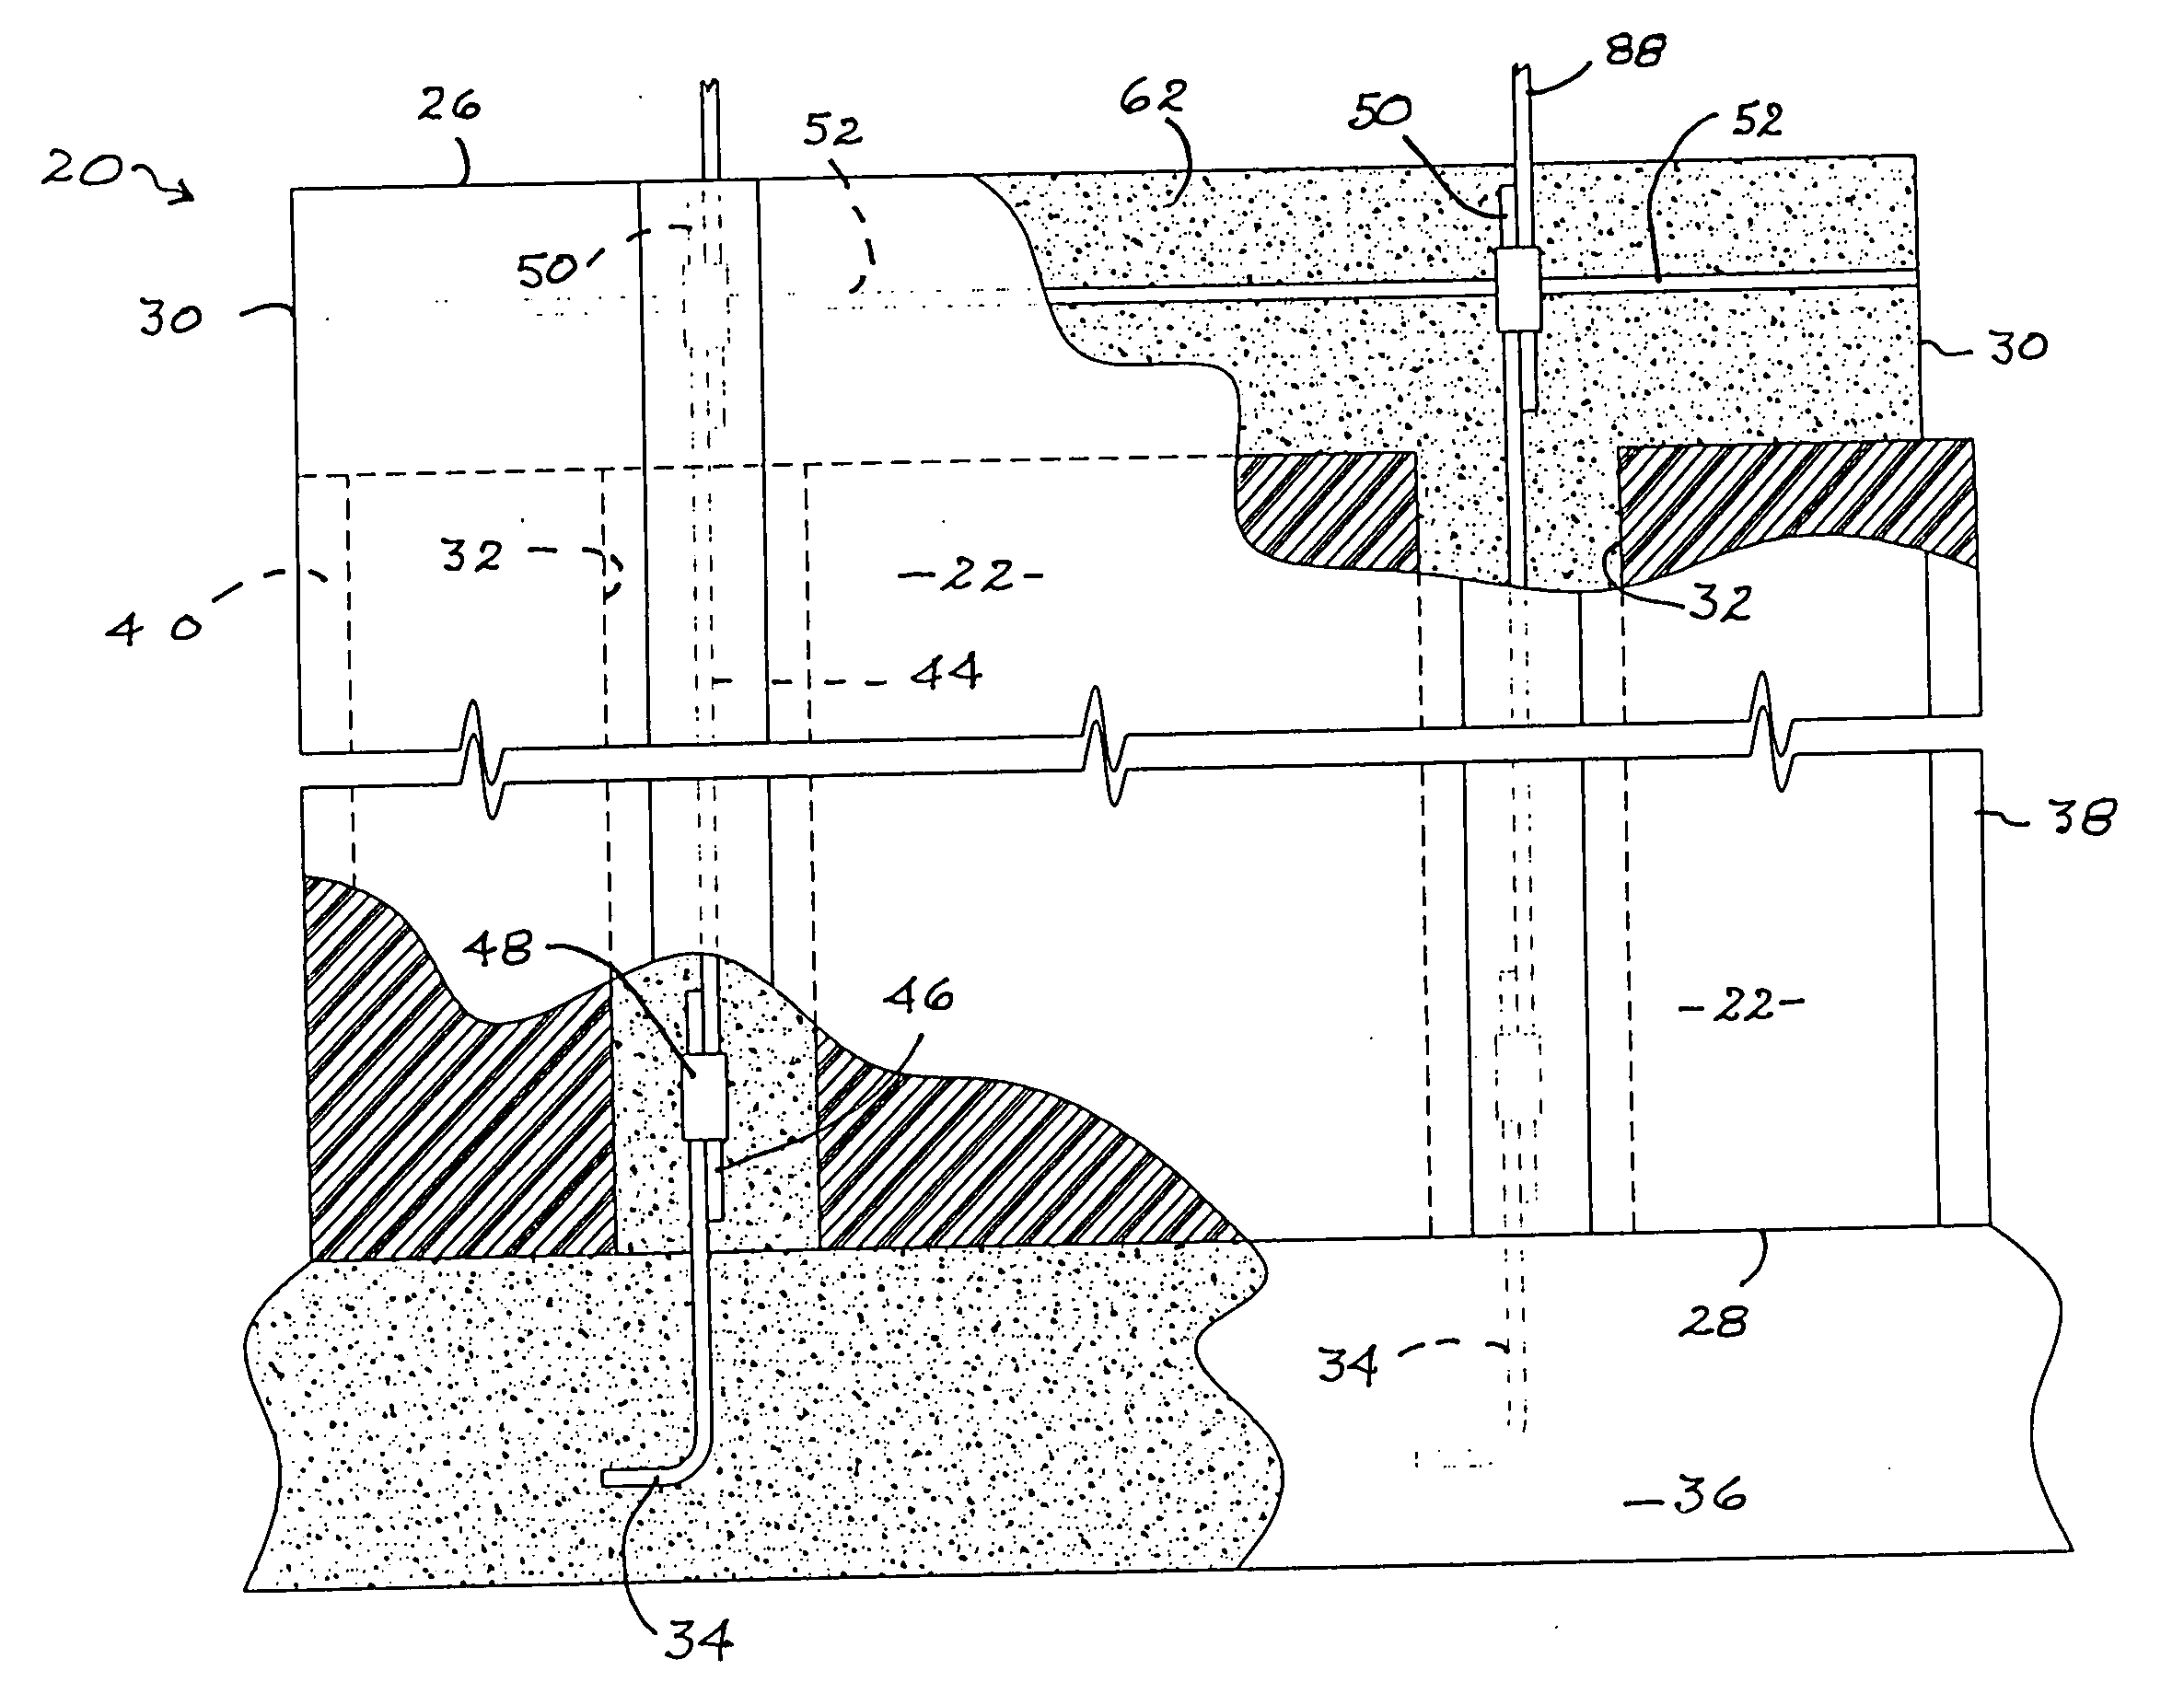 Insulated concrete form system